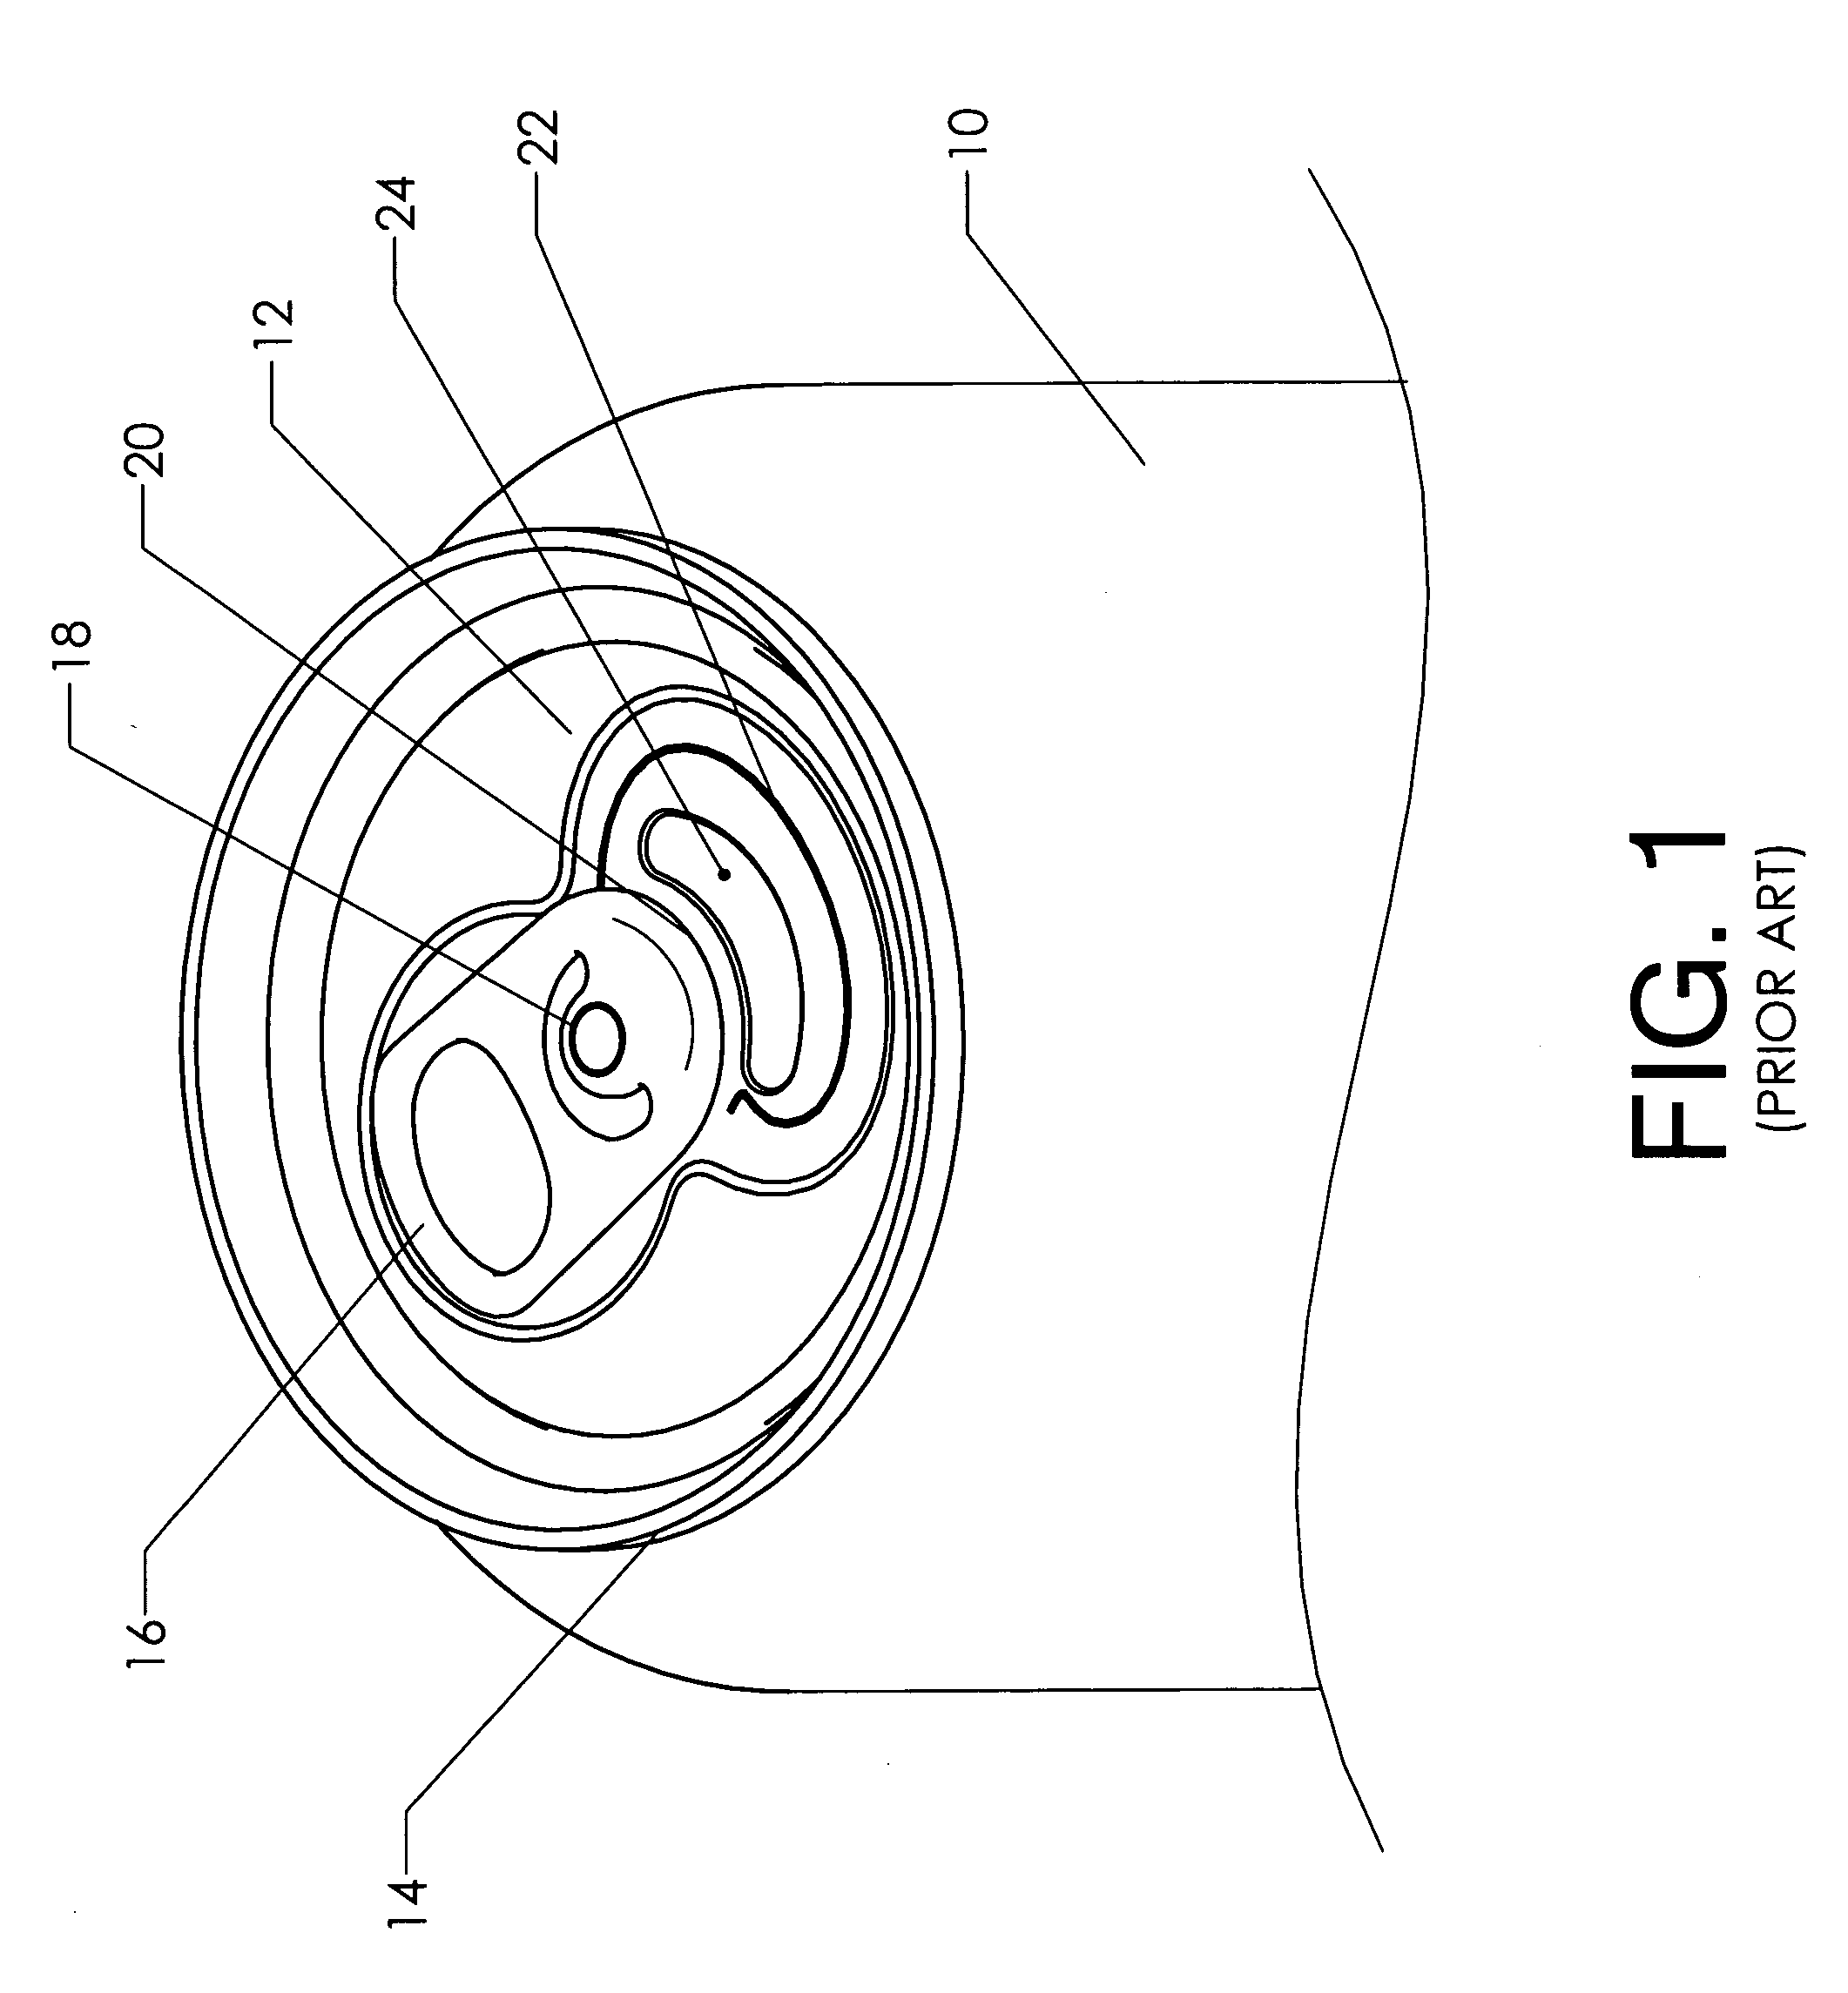 Bifurcated beverage can with unified opening and mixing operation